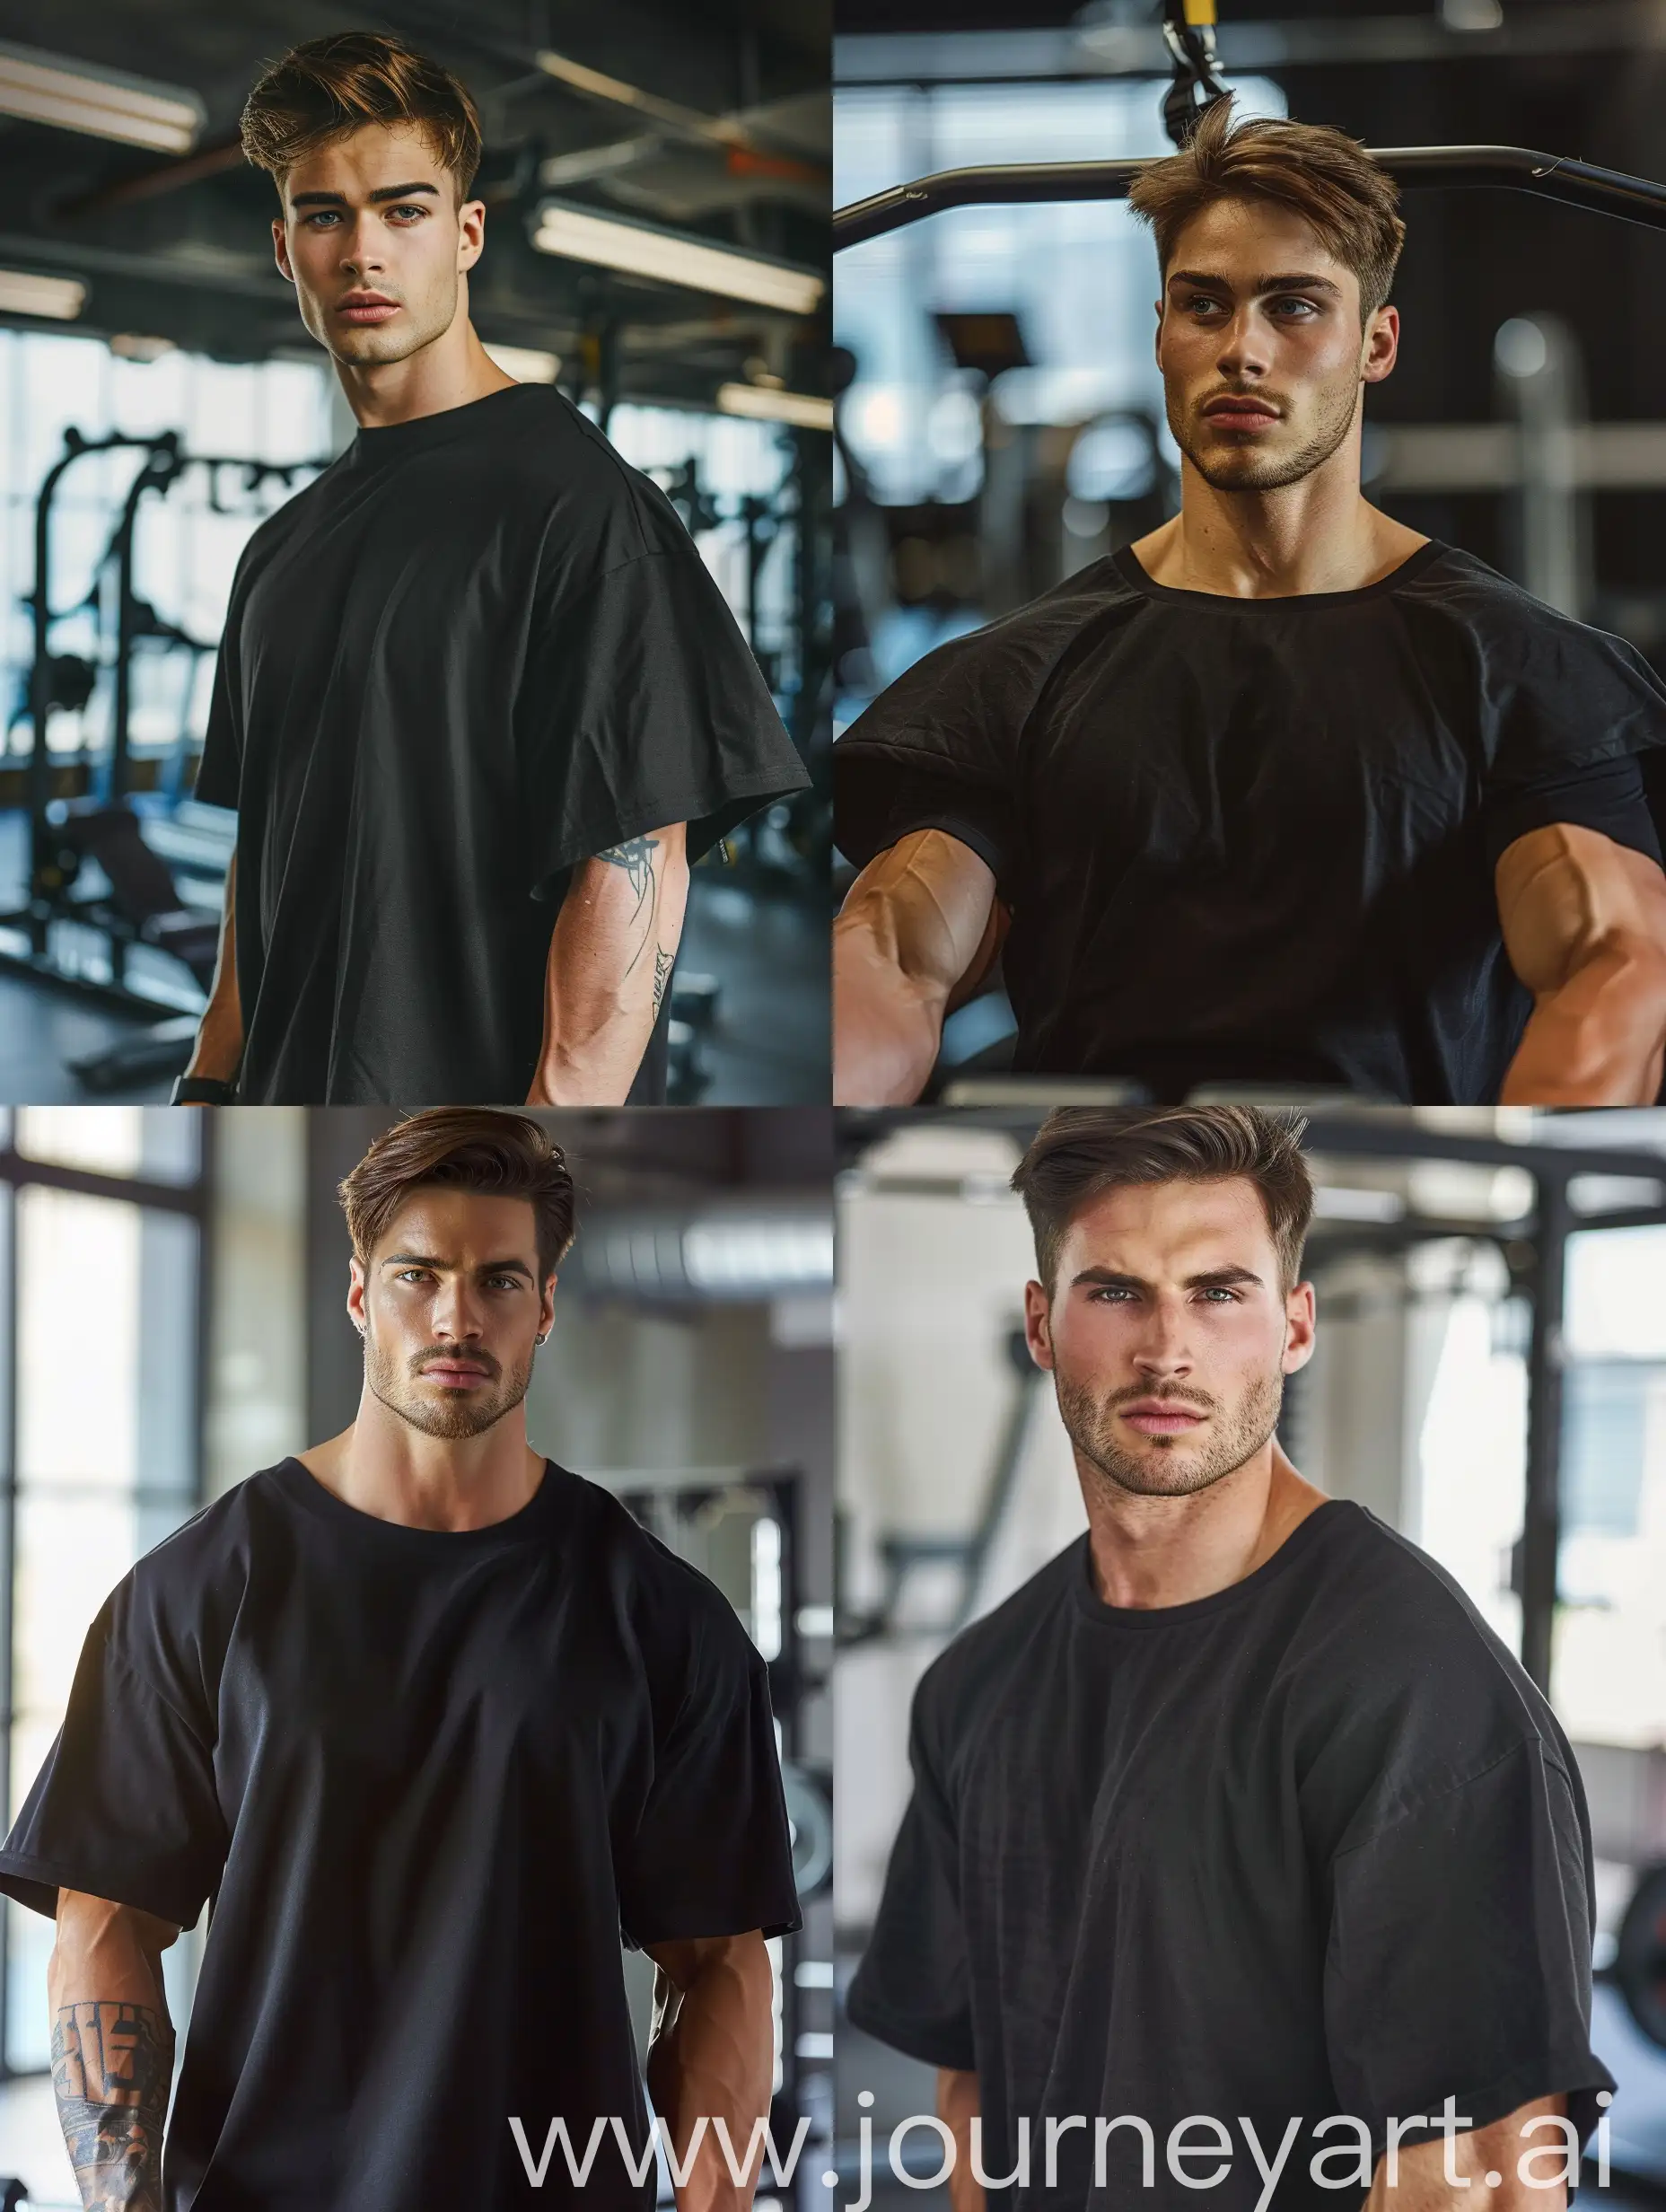 A cinematic, high resolution photo, of a handsome man, mid-20s, very athletic, wearing an oversized drop-shoulder black t-shirt, working out in the gym